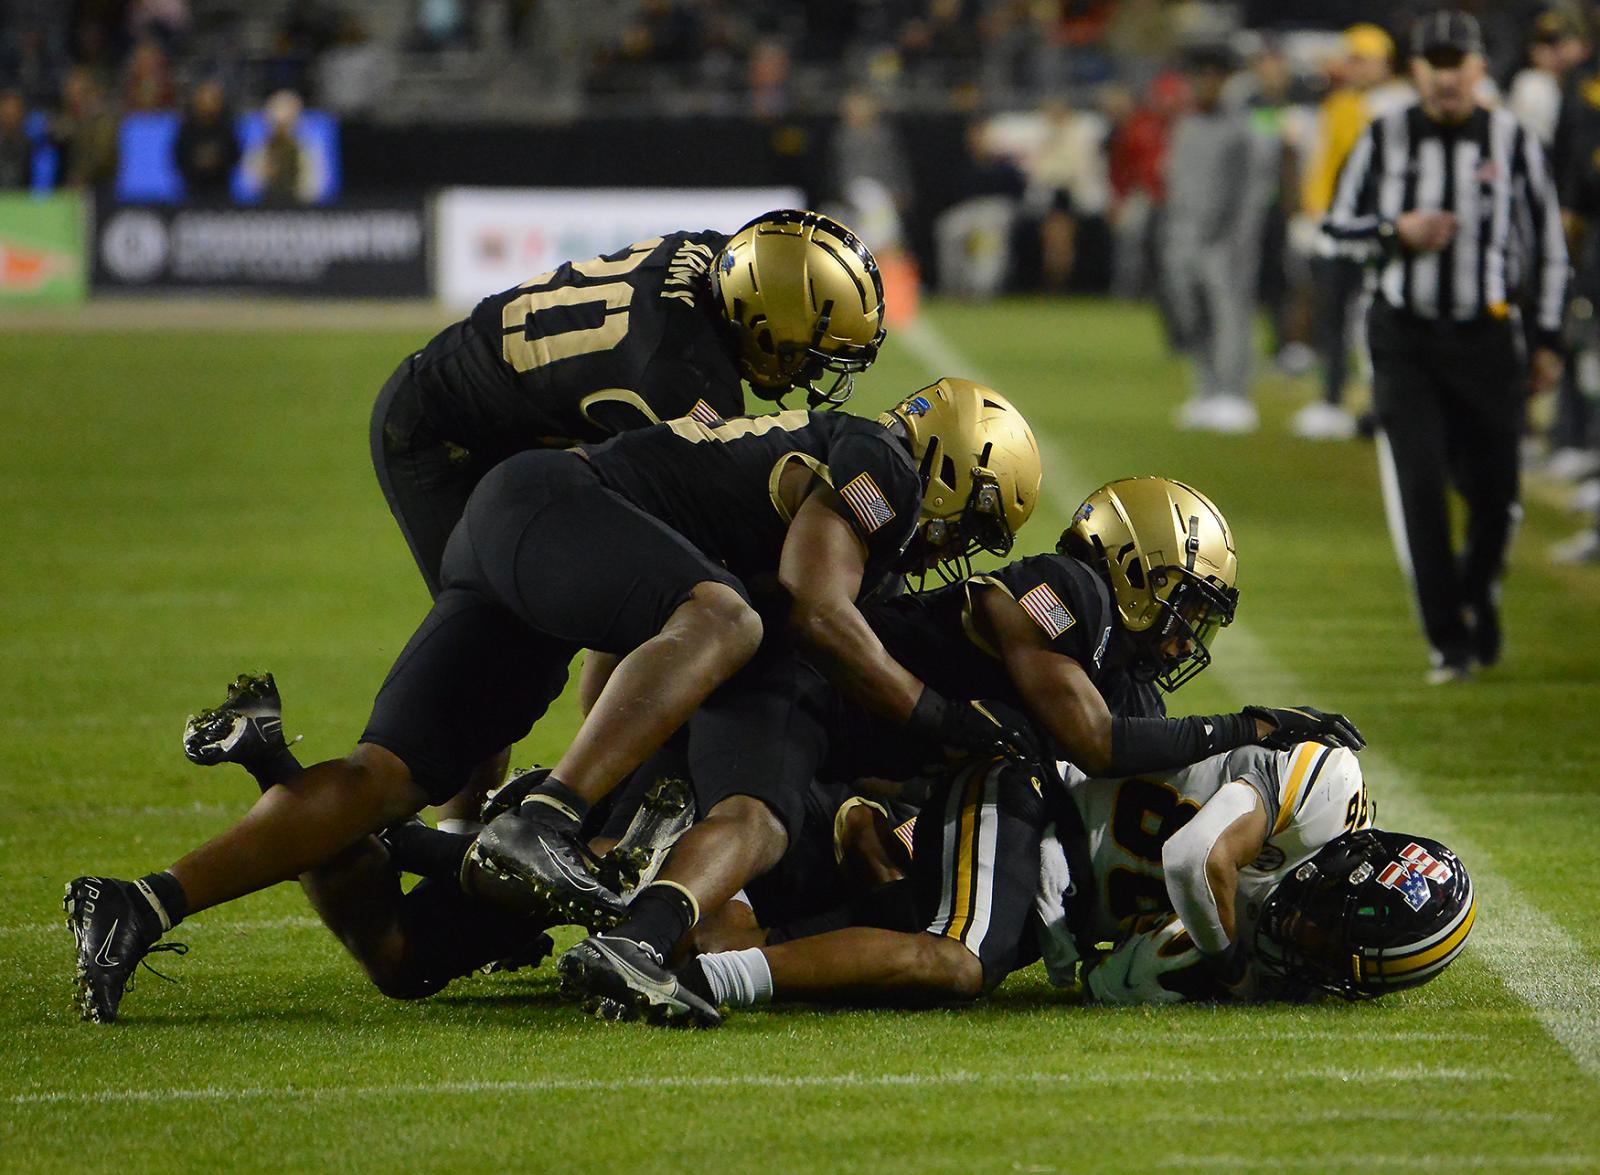 Image from Singles - Tauskie Dove gets tackled by army players during the...